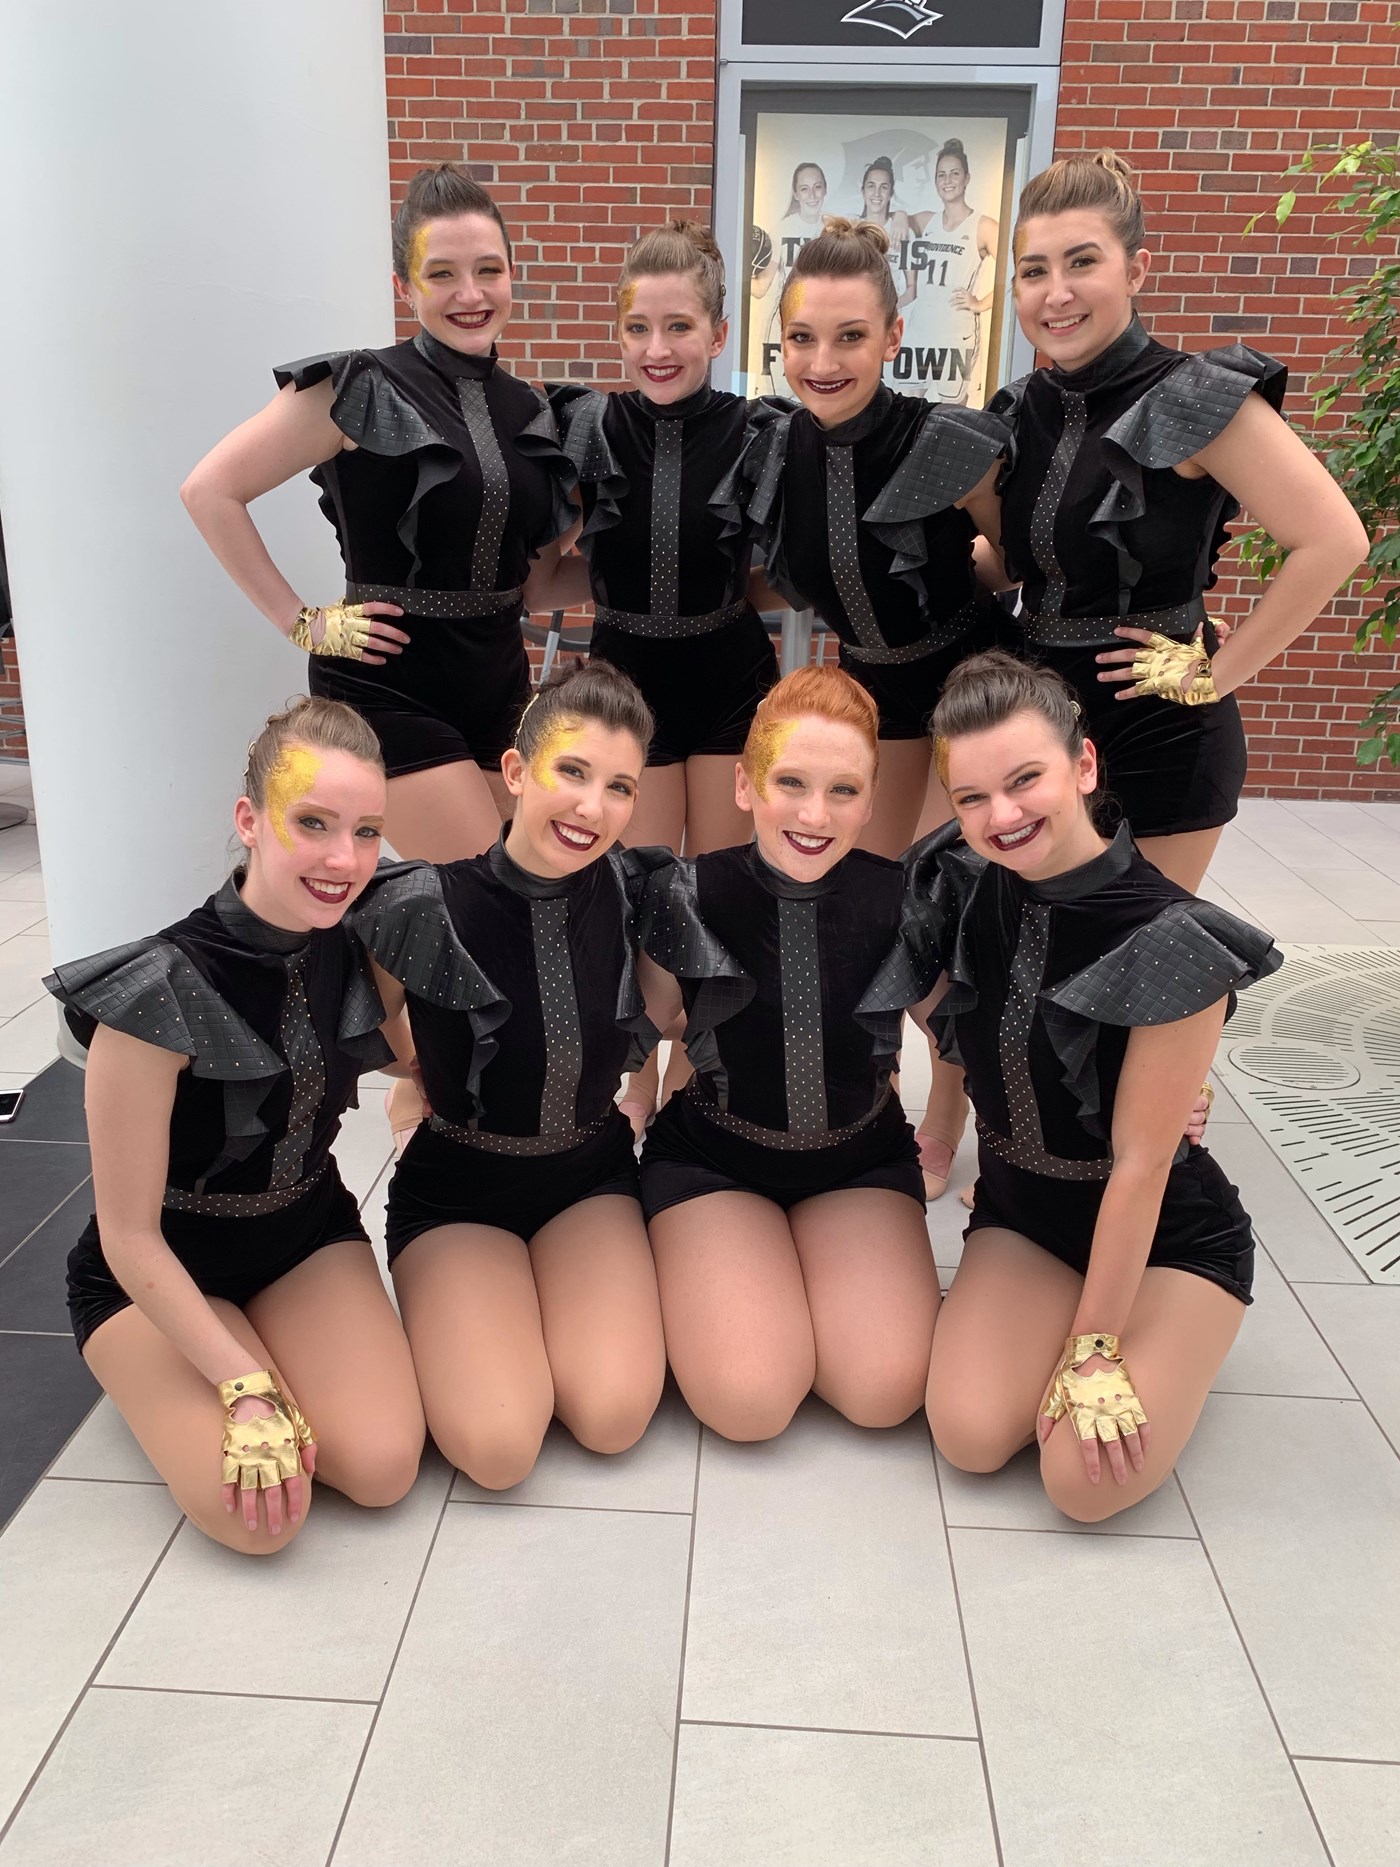 Dance team posing in uniform prior to nationals performance 